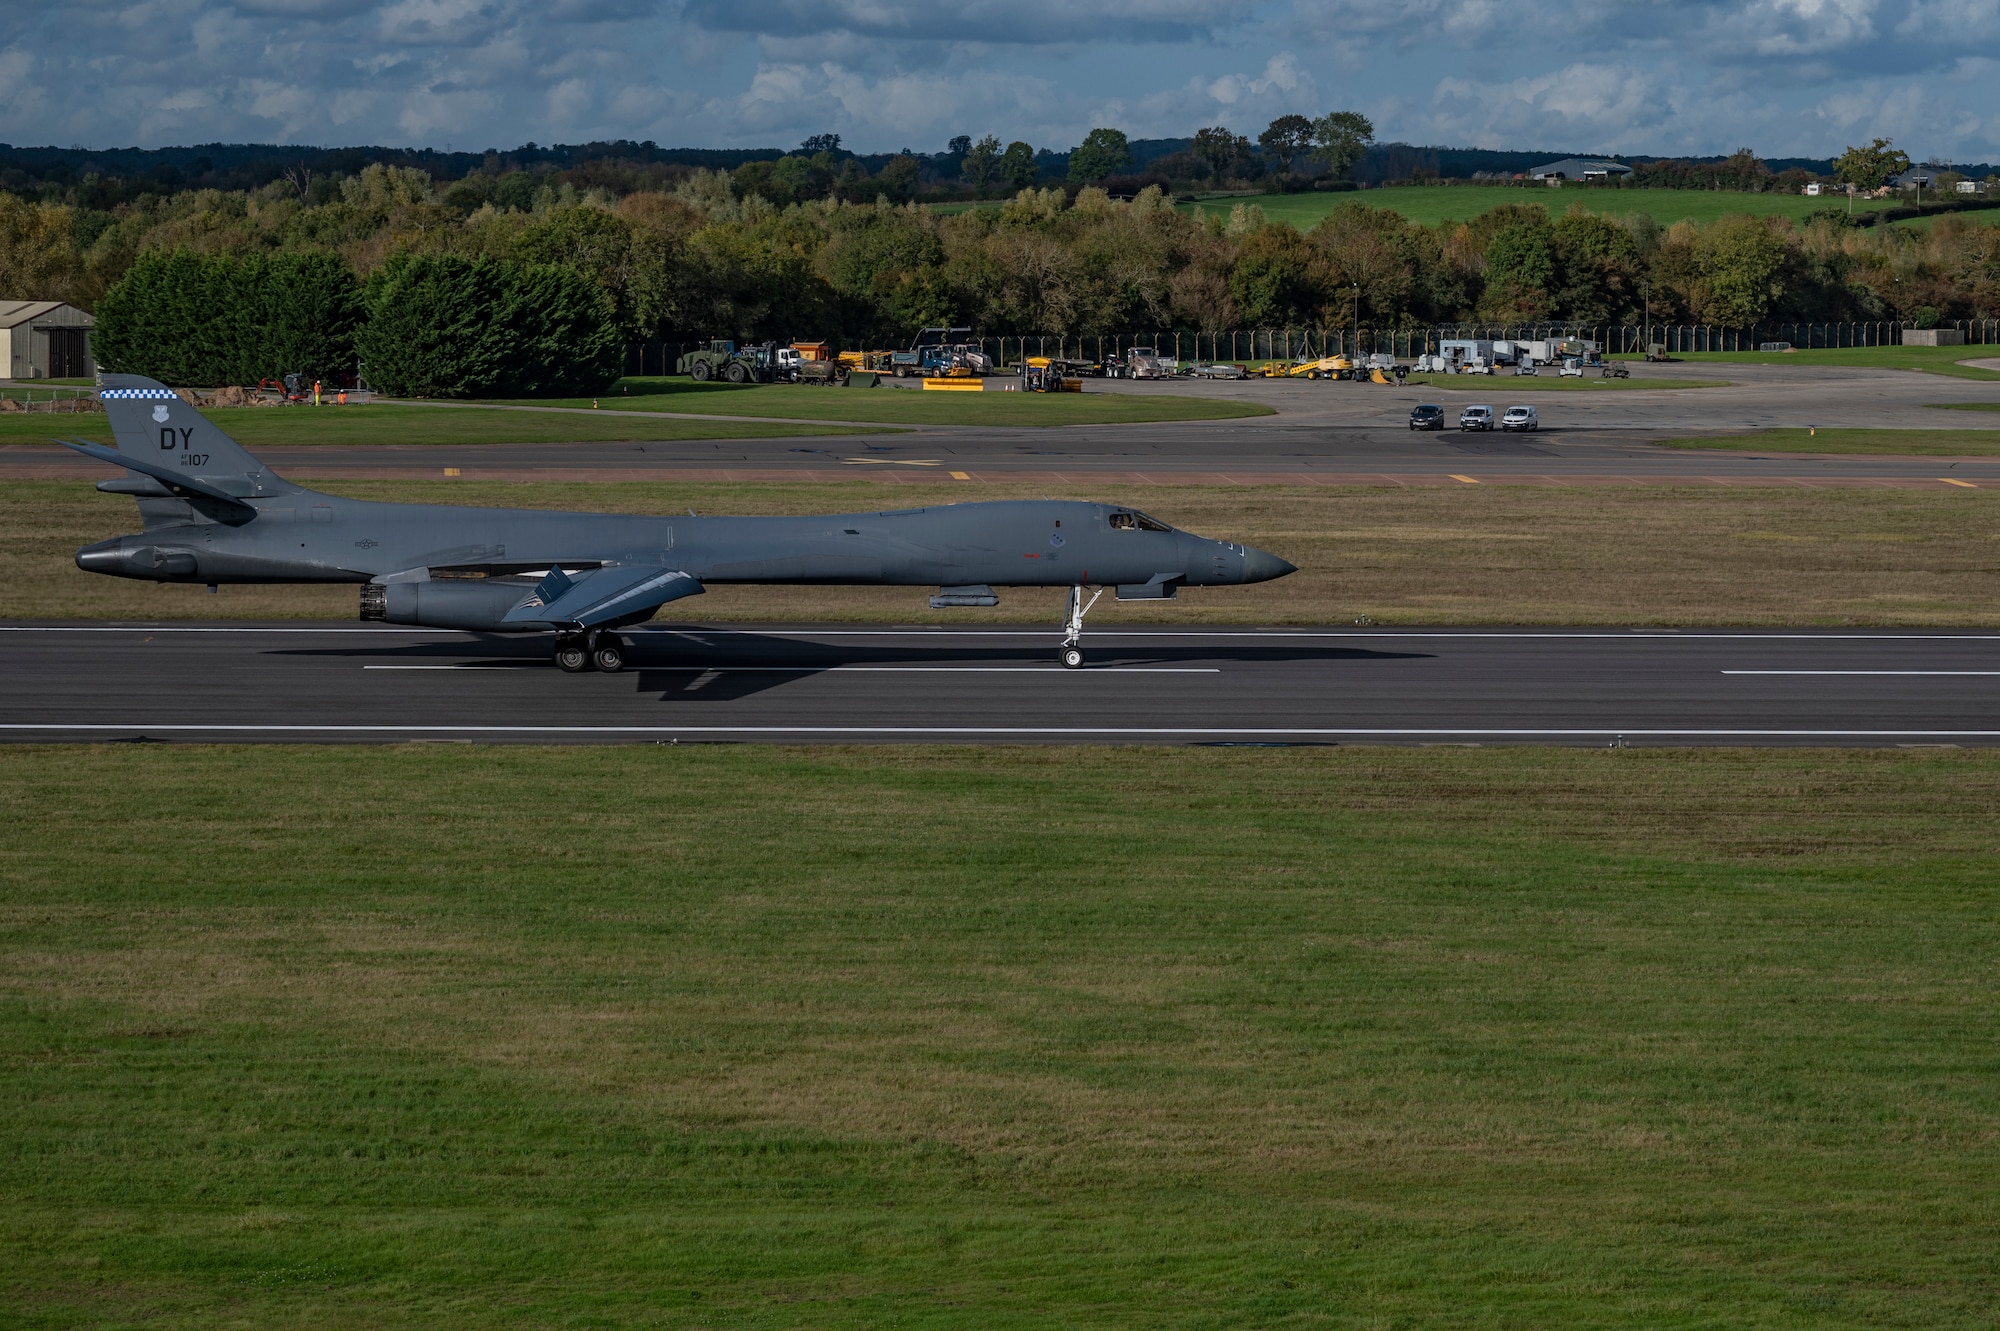 A B-1B Lancer assigned to the 9th Expeditionary Bomb Squadron lands at RAF Fairford, United Kingdom, Oct. 24, 2023. U.S. Air Forces in Europe routinely hosts and supports a variety of U.S. Air Force aircraft and units for training to support geographic combatant command objectives. Operating with a variety of aircraft and units in Europe aids in maintaining a ready and postured force prepared to respond to and support global operations. (U.S. Air Force Photo by Senior Airman Ryan Hayman)